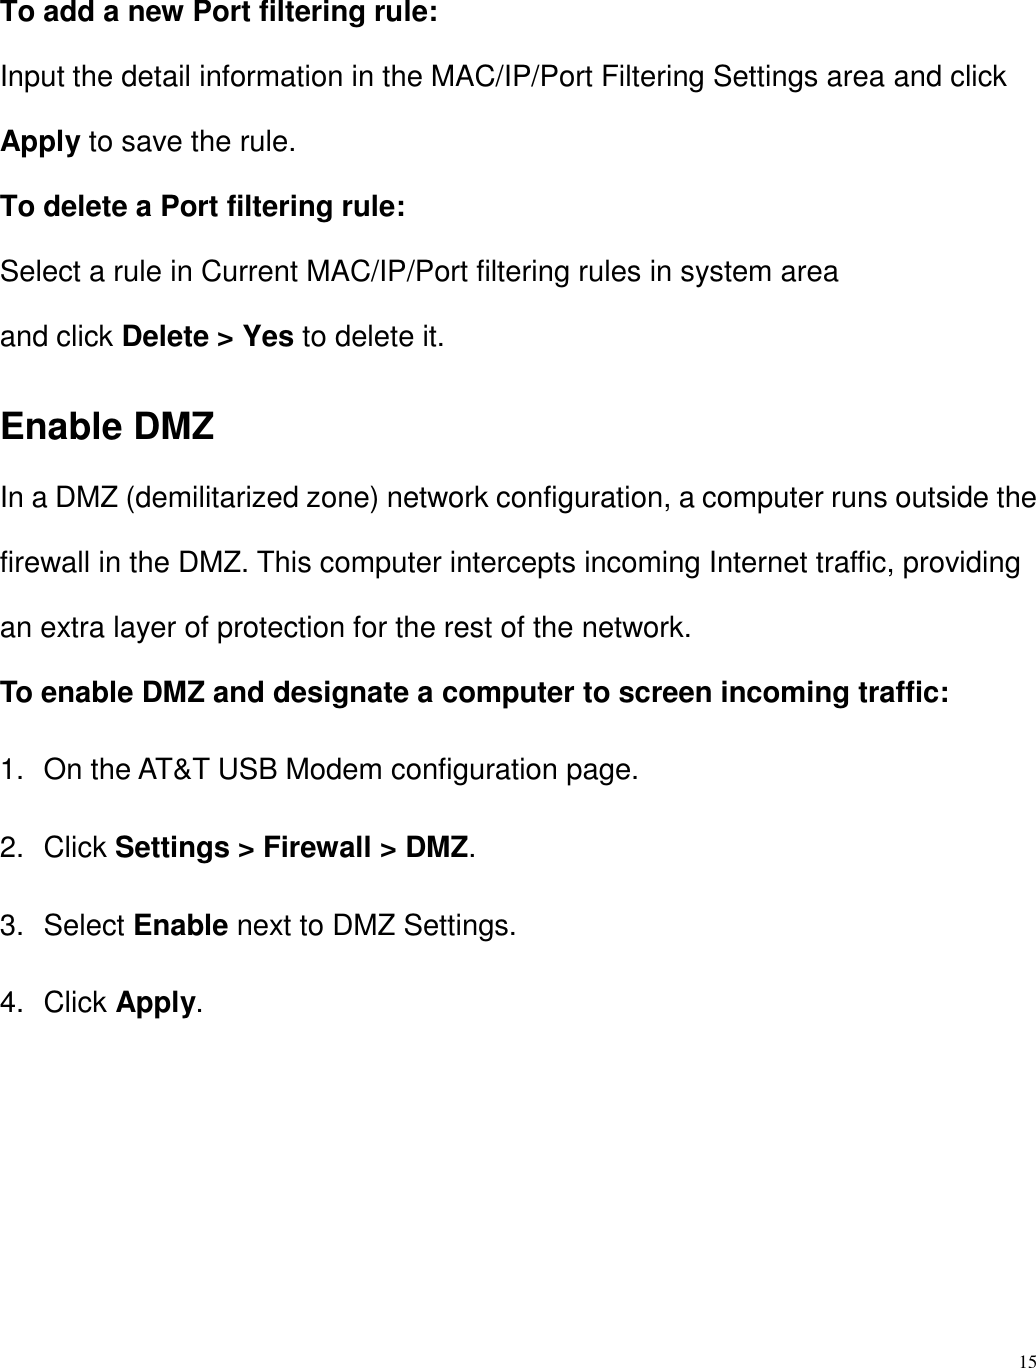 15  To add a new Port filtering rule: Input the detail information in the MAC/IP/Port Filtering Settings area and click Apply to save the rule. To delete a Port filtering rule: Select a rule in Current MAC/IP/Port filtering rules in system area and click Delete &gt; Yes to delete it. Enable DMZ In a DMZ (demilitarized zone) network configuration, a computer runs outside the firewall in the DMZ. This computer intercepts incoming Internet traffic, providing an extra layer of protection for the rest of the network. To enable DMZ and designate a computer to screen incoming traffic: 1.  On the AT&amp;T USB Modem configuration page. 2.  Click Settings &gt; Firewall &gt; DMZ. 3.  Select Enable next to DMZ Settings. 4.  Click Apply.     